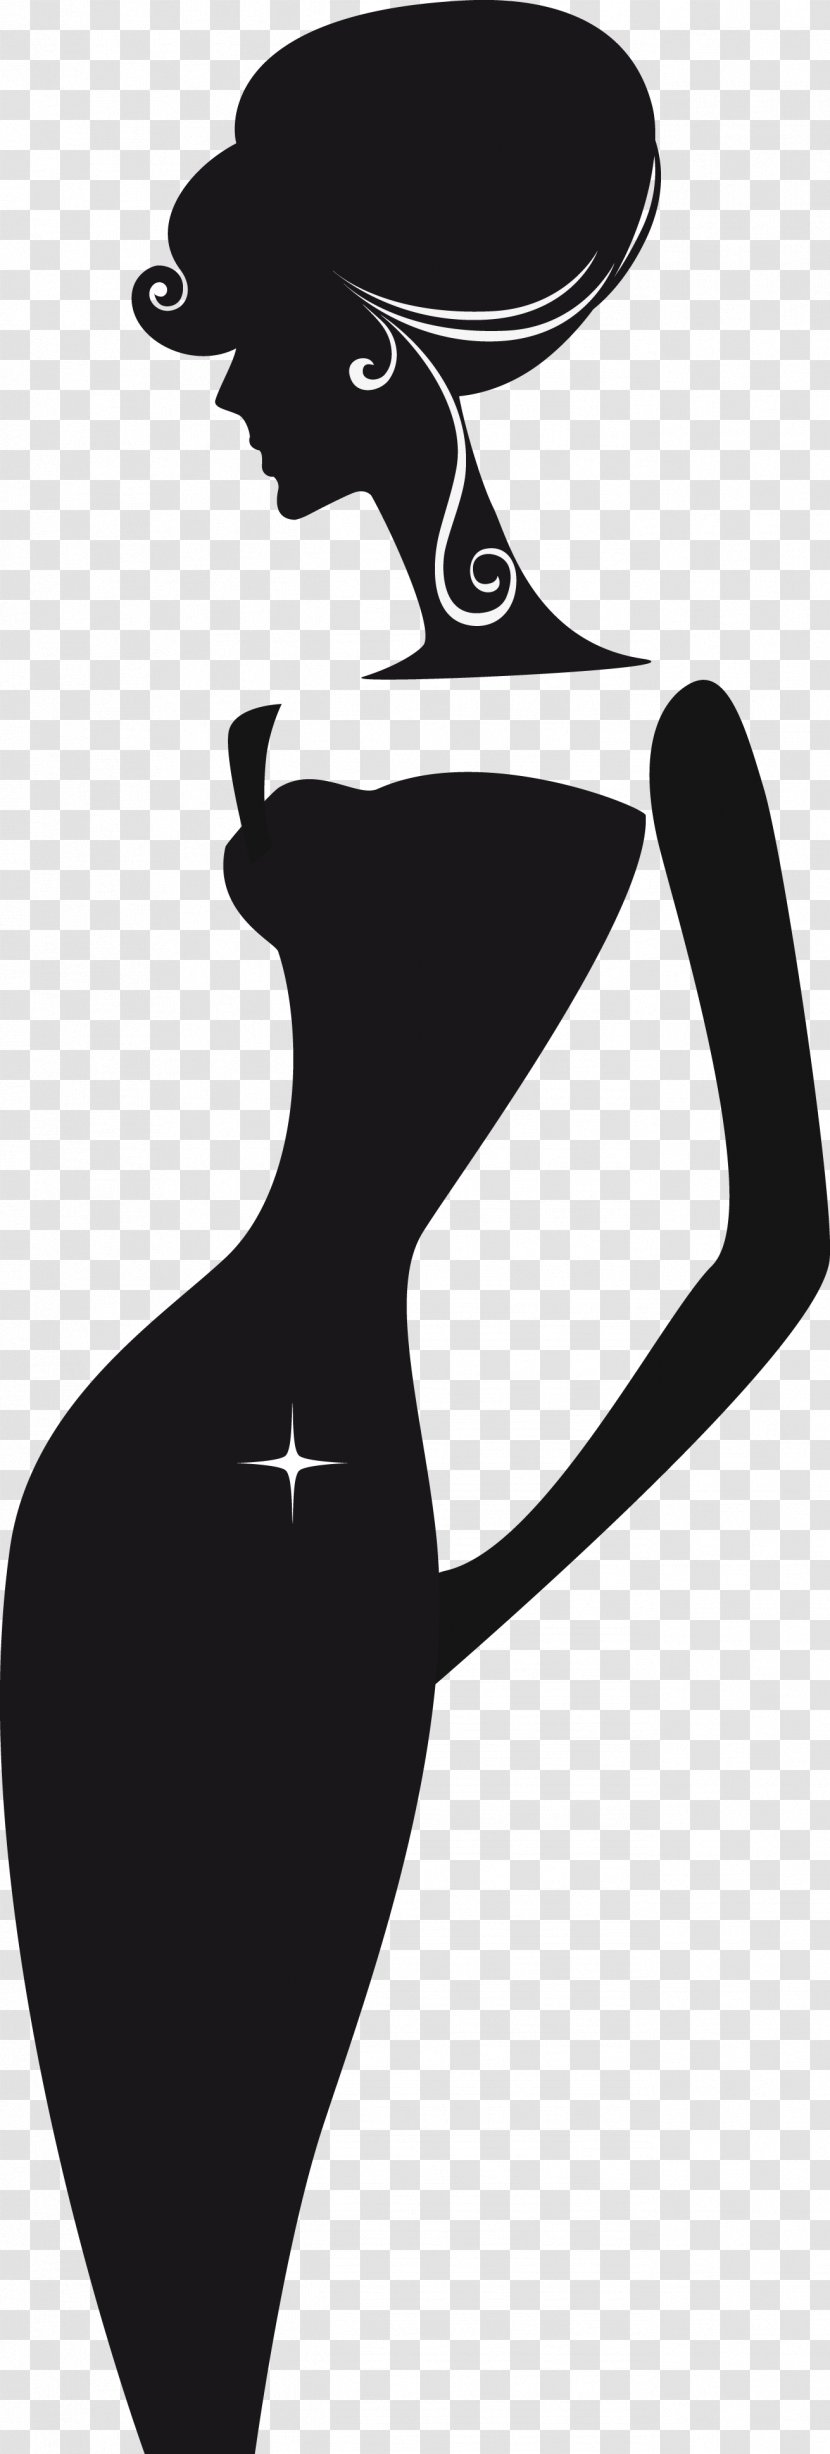 Wall Decal Sticker Woman Vinyl Group - Silhouette Transparent PNG